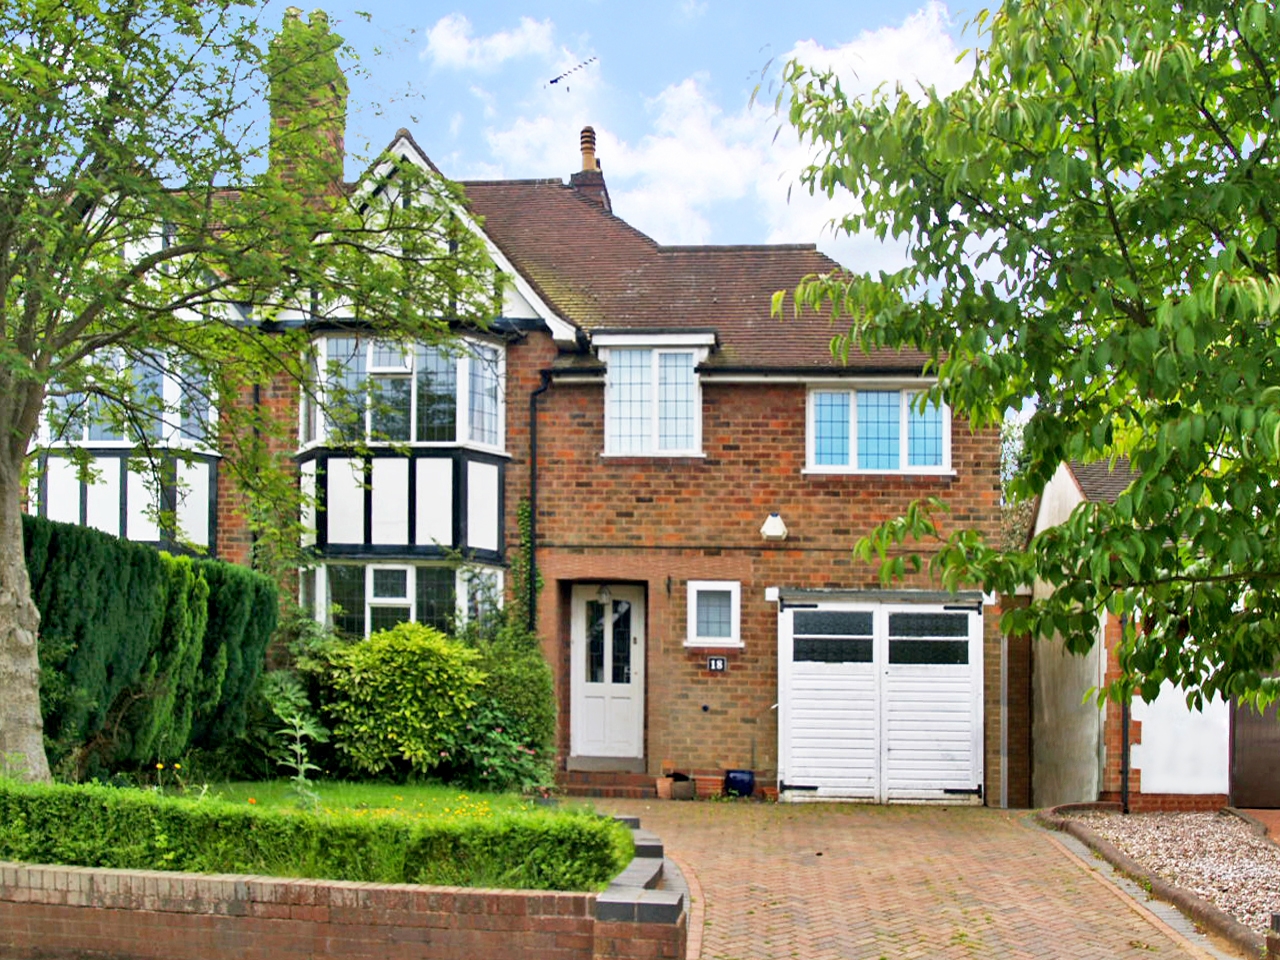 4 bedroom semi detached house SSTC in Solihull - Main Image.